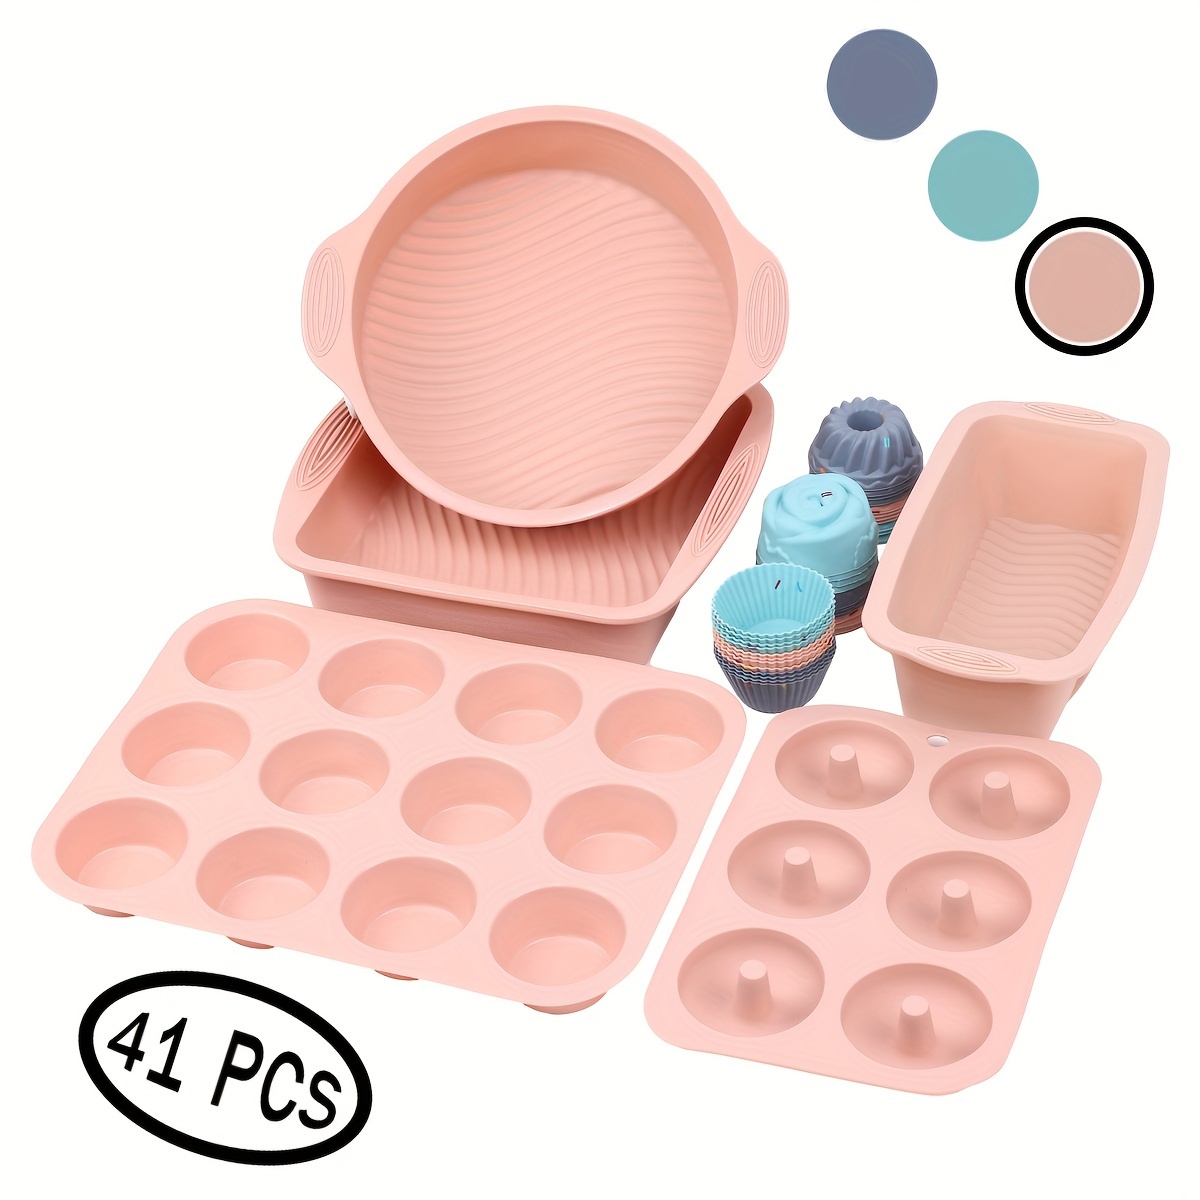 41 Pieces Silicone Baking Pan, Silicone Cake Molds, Baking Sheet, Donut  Pan, Silicone Muffin Pan with 36 Pack Silicone Baking Cups, Dishwasher Safe